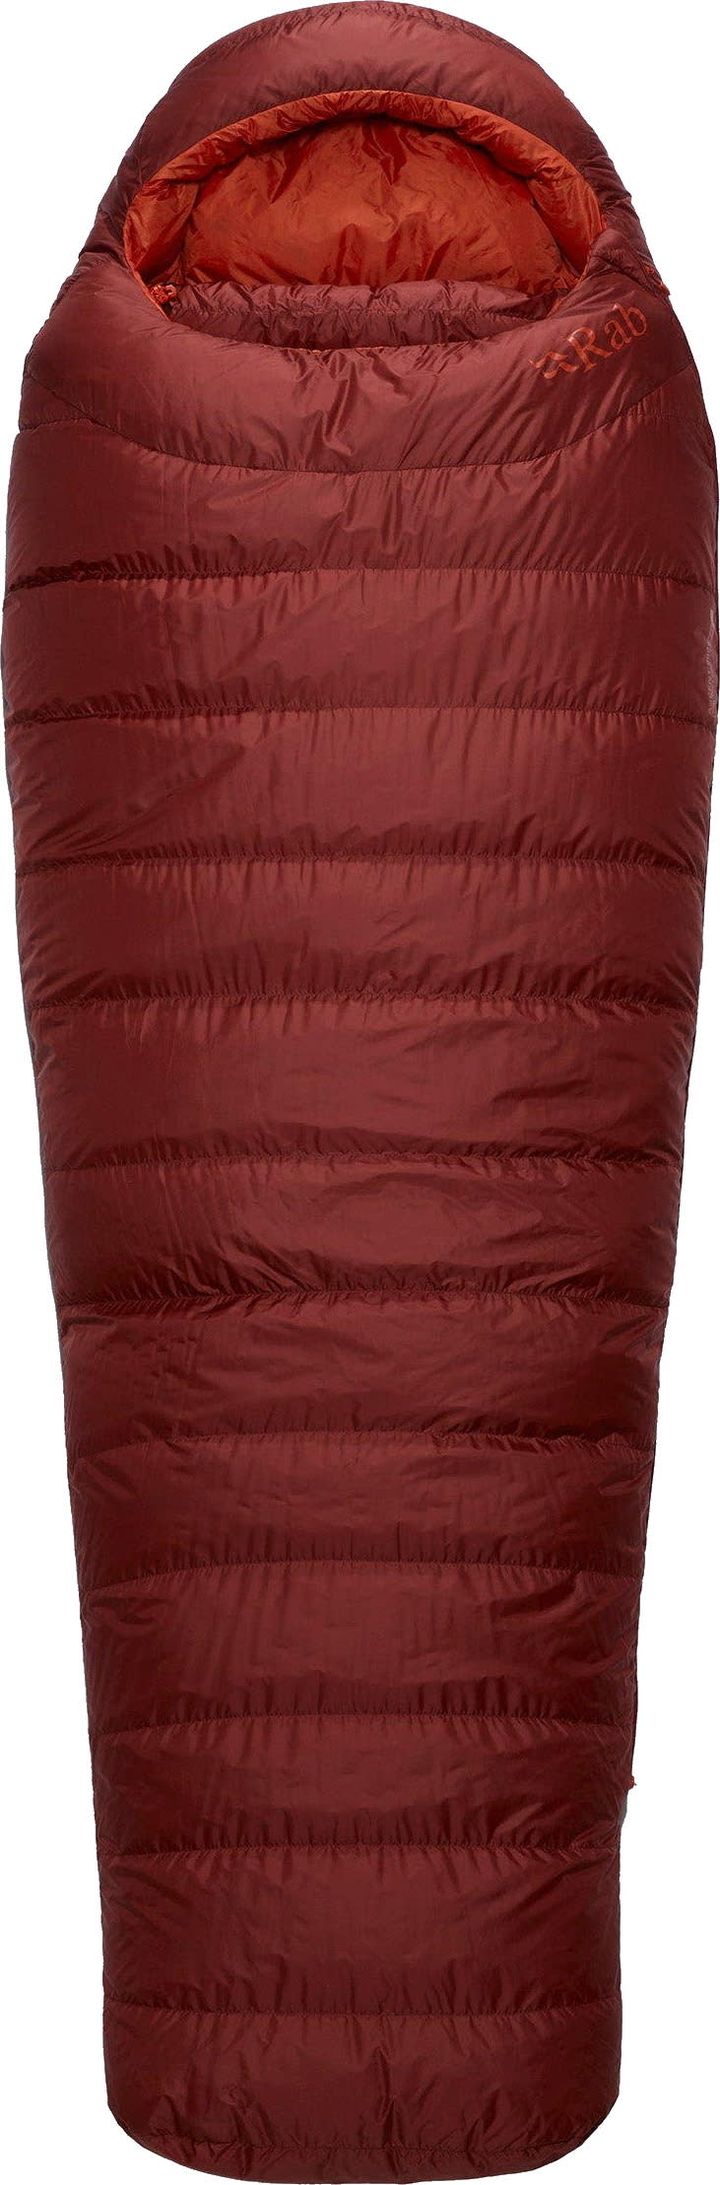 Rab Ascent 900 Left/Right Oxblood Red Rab